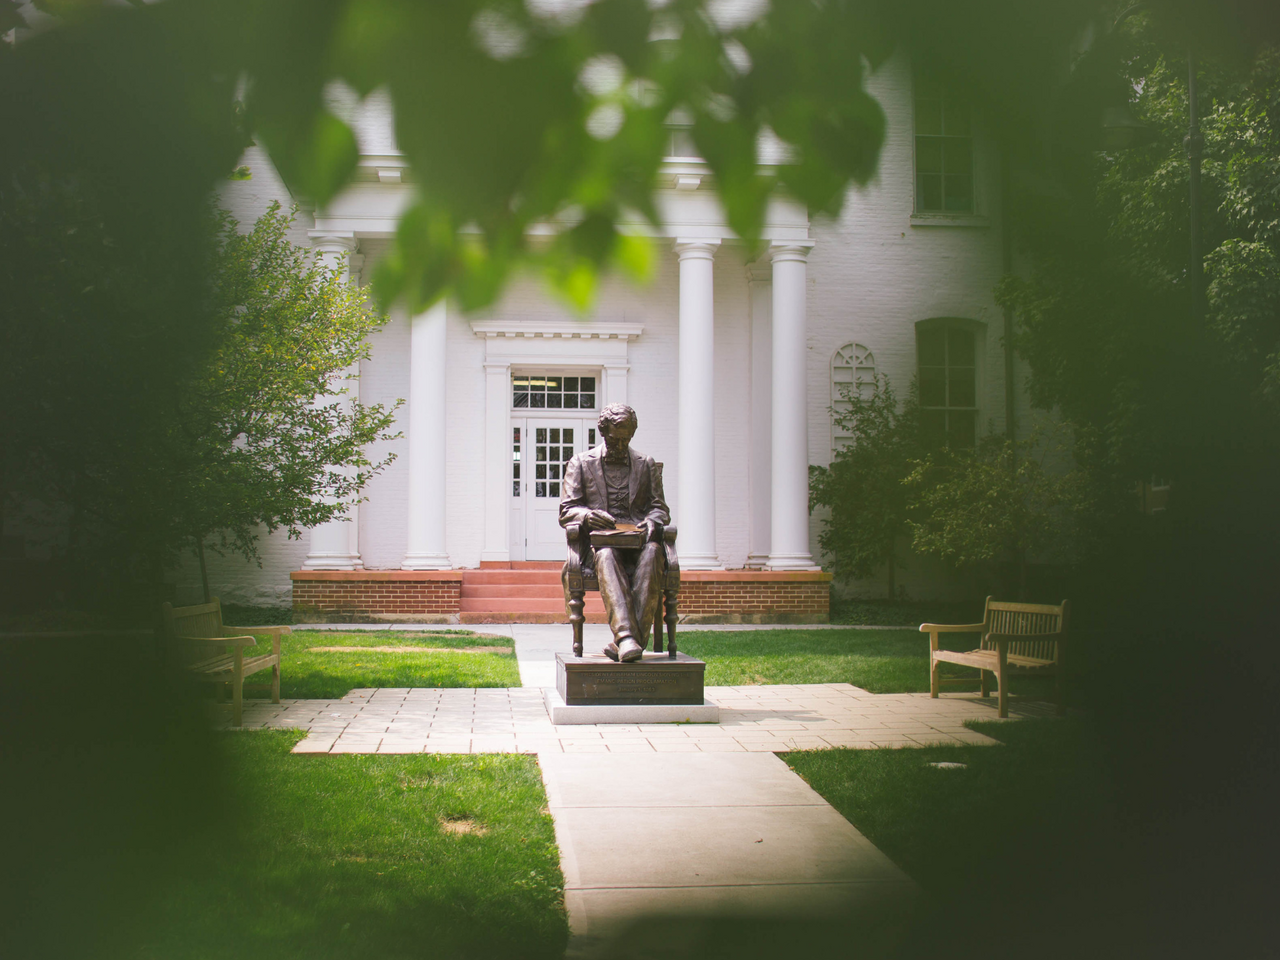 Photograph of Lincoln Statue on Gettysburg Campus